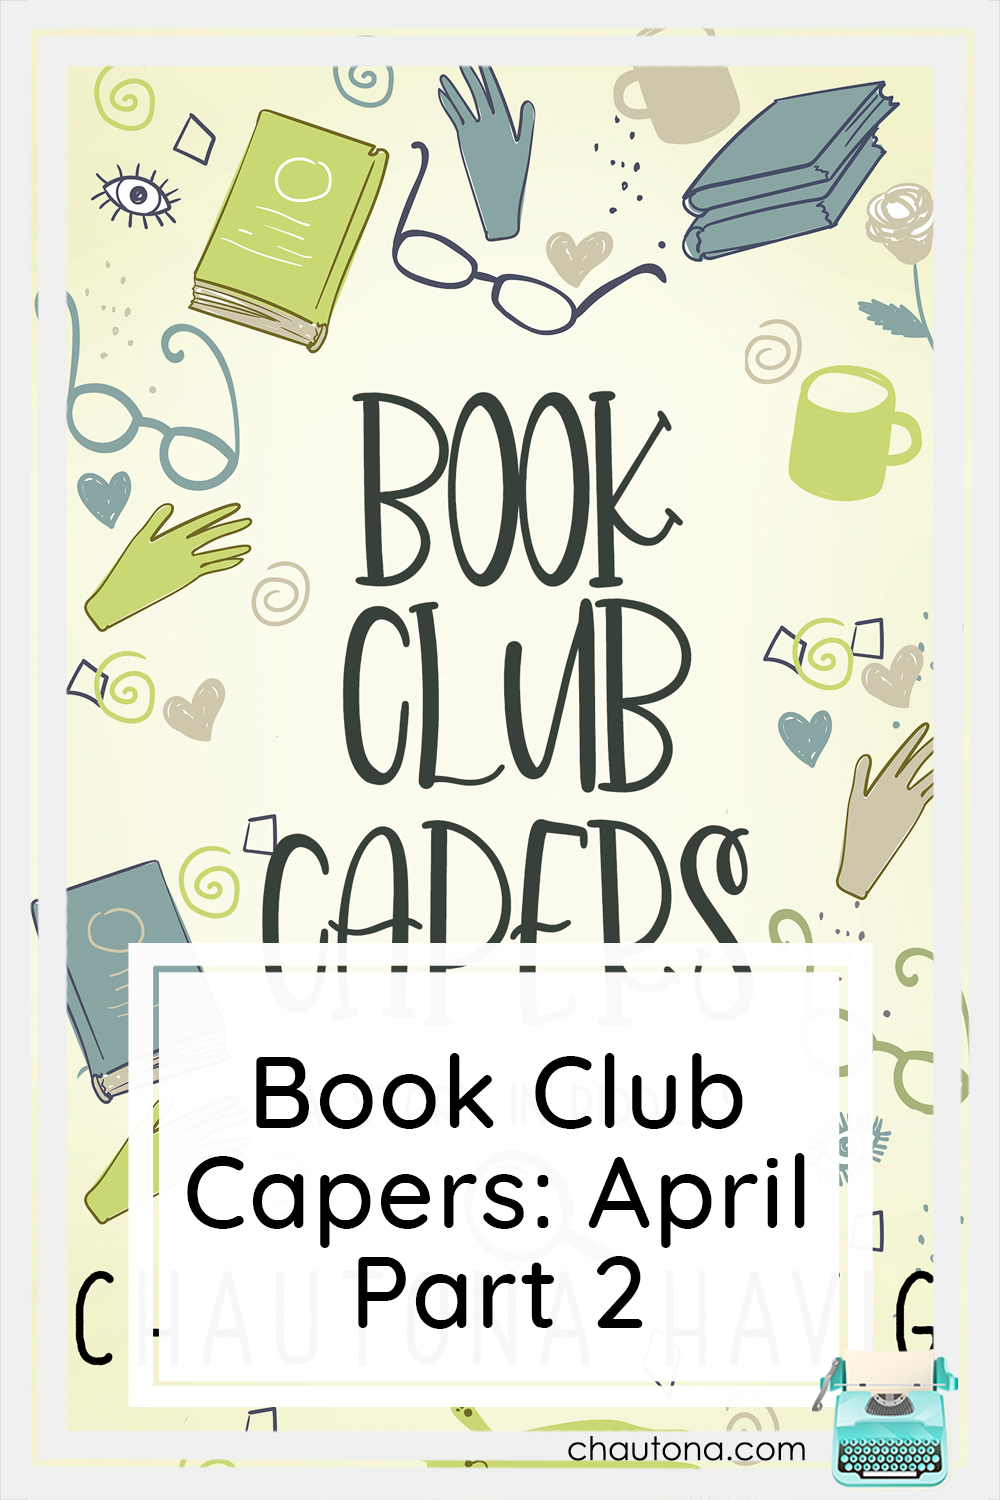 new author book club capers